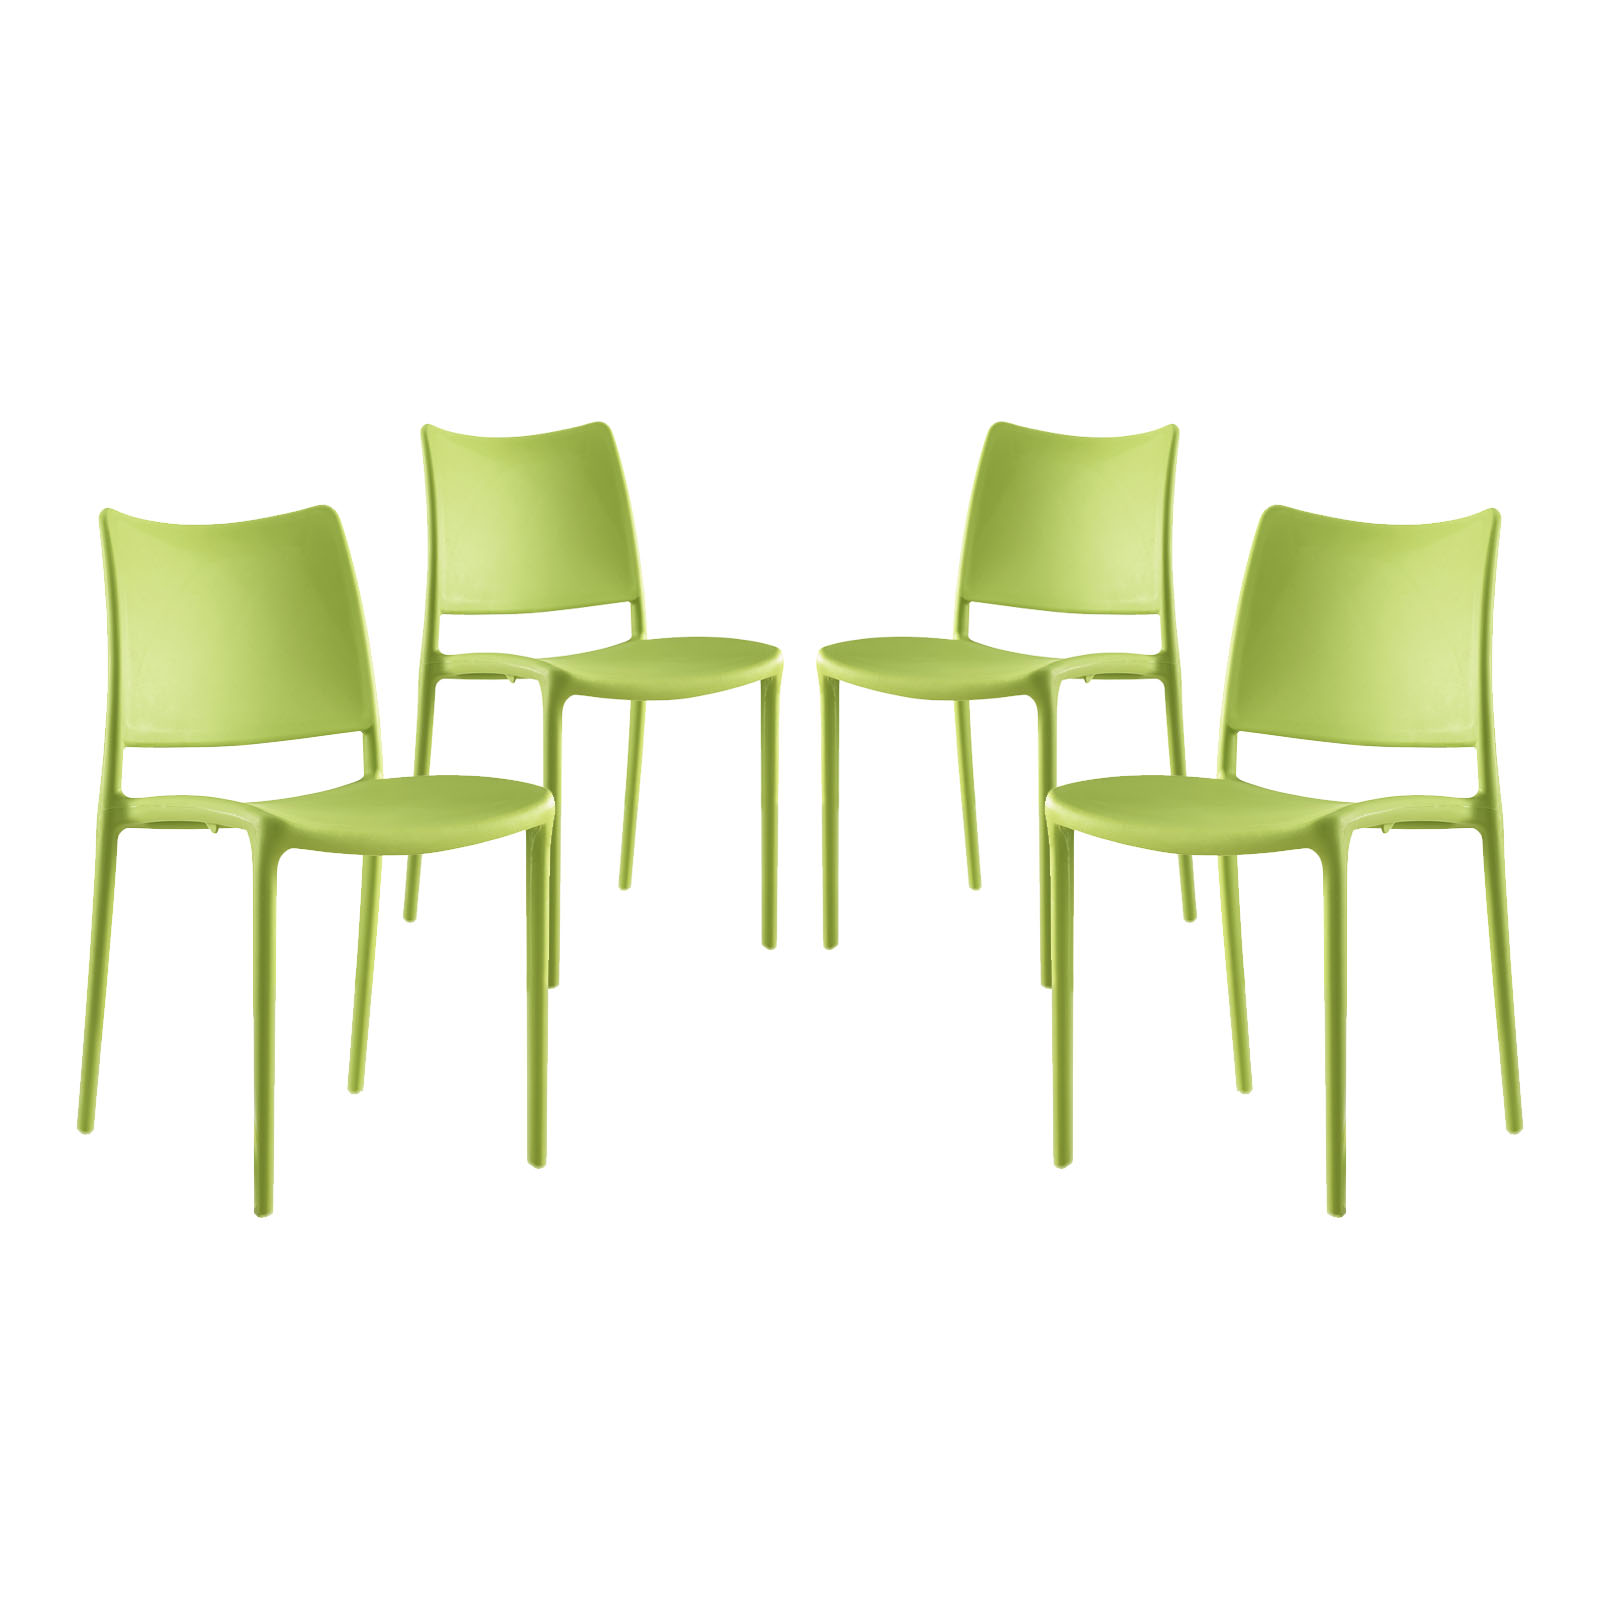 Modern Contemporary Urban Design Outdoor Kitchen Room Dining Chair ( Set of 4), Green, Plastic - image 1 of 5